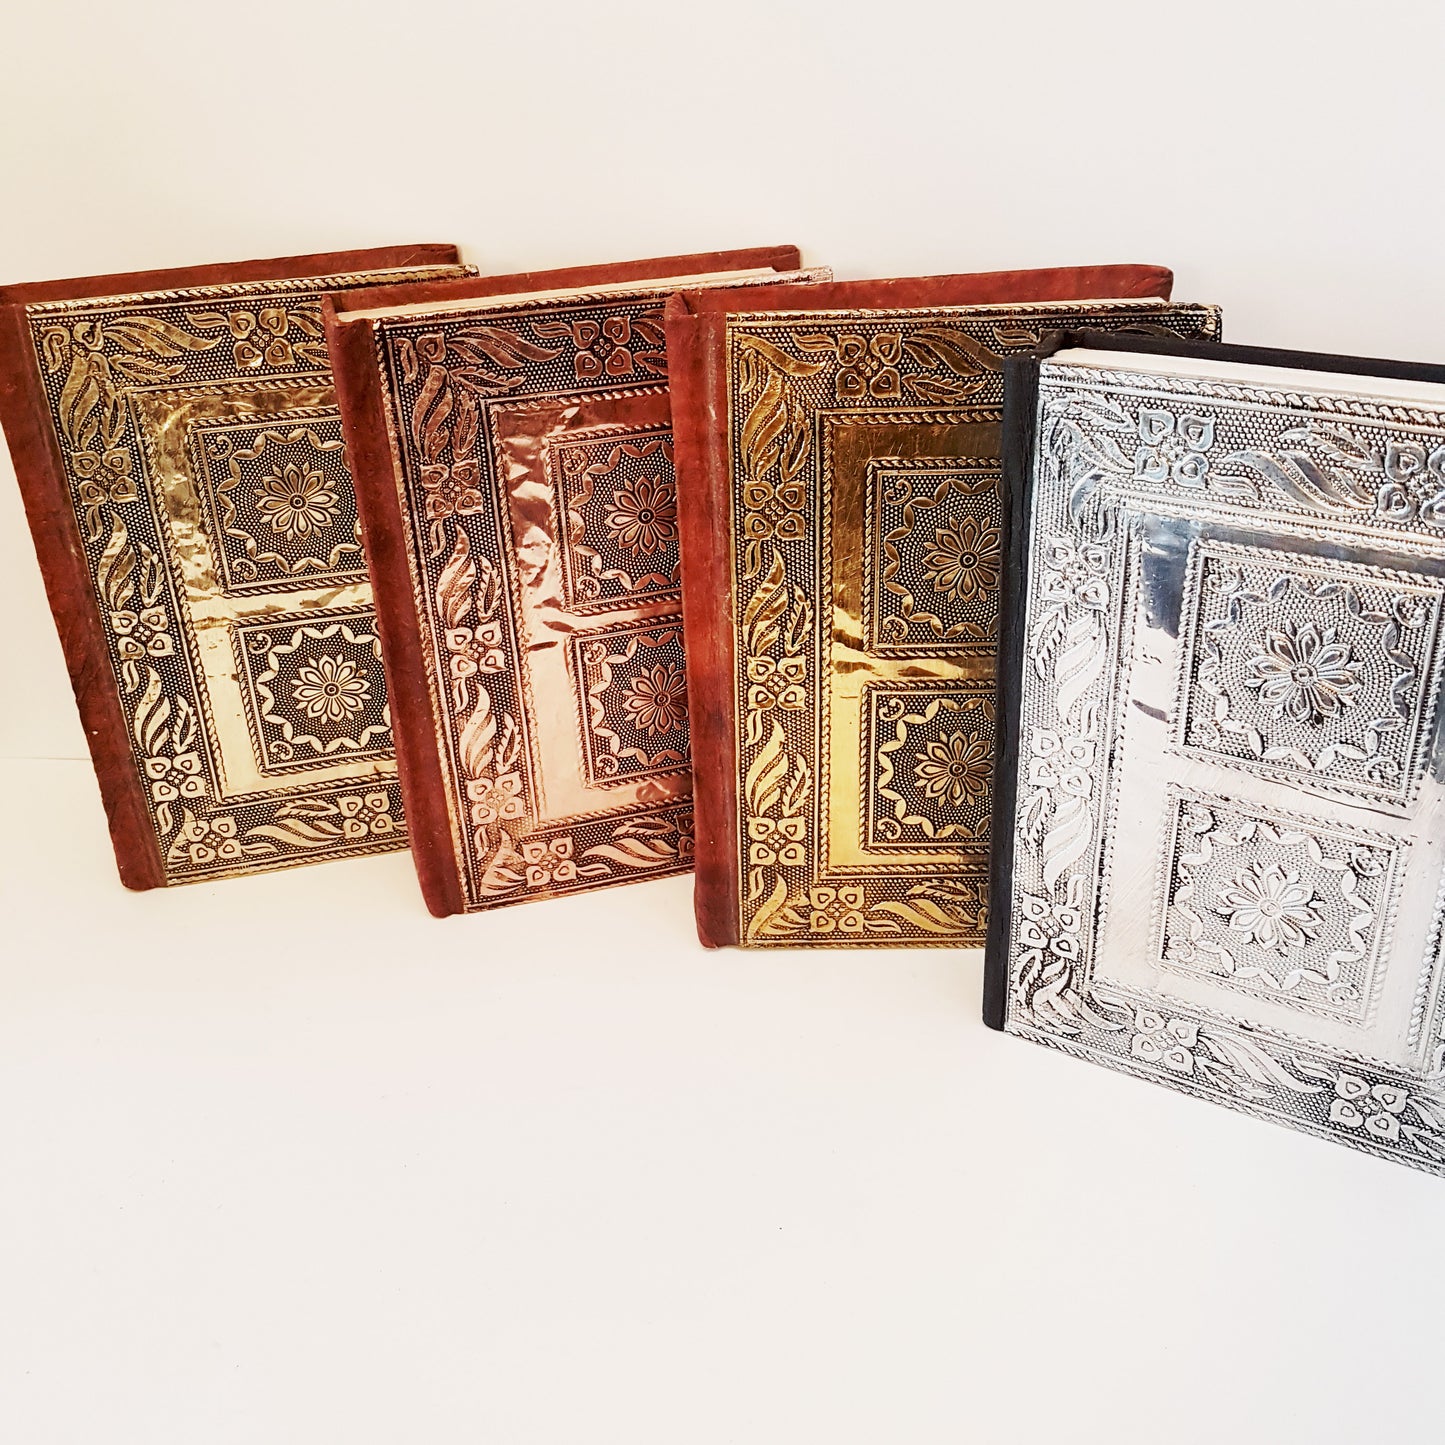 Medieval metal double rose sketchbook journal 5x7 inch. Antique embossed hardcover design. For drawing, journal, diary, writing.